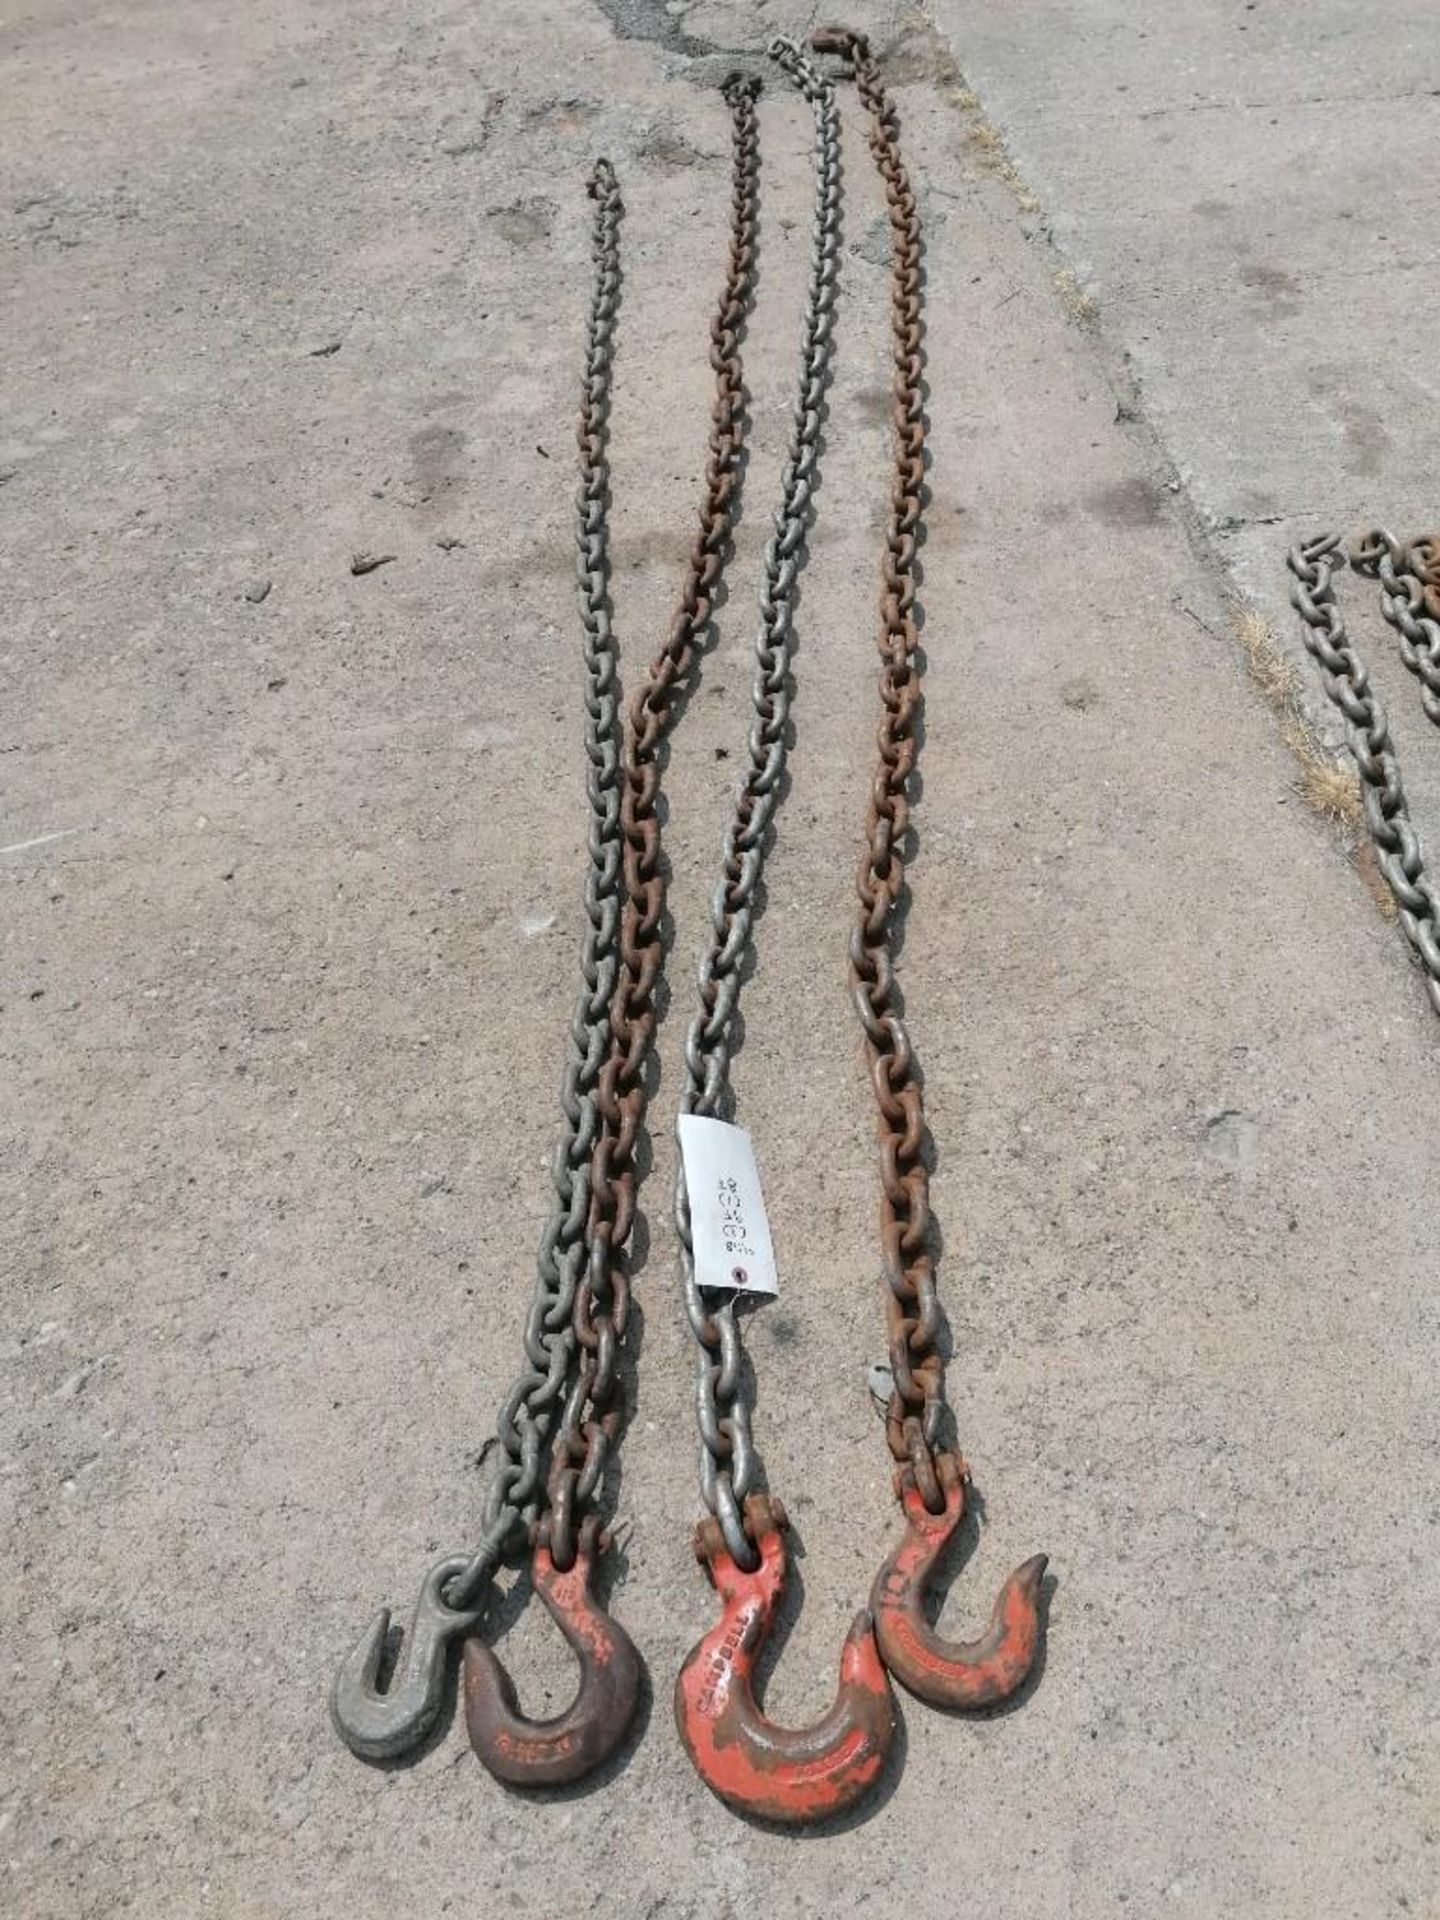 (3) 1/2" USA 9' & (1) 1/2" USA 8' Chain with Hook. Located at 301 E Henry Street, Mt. Pleasant, IA